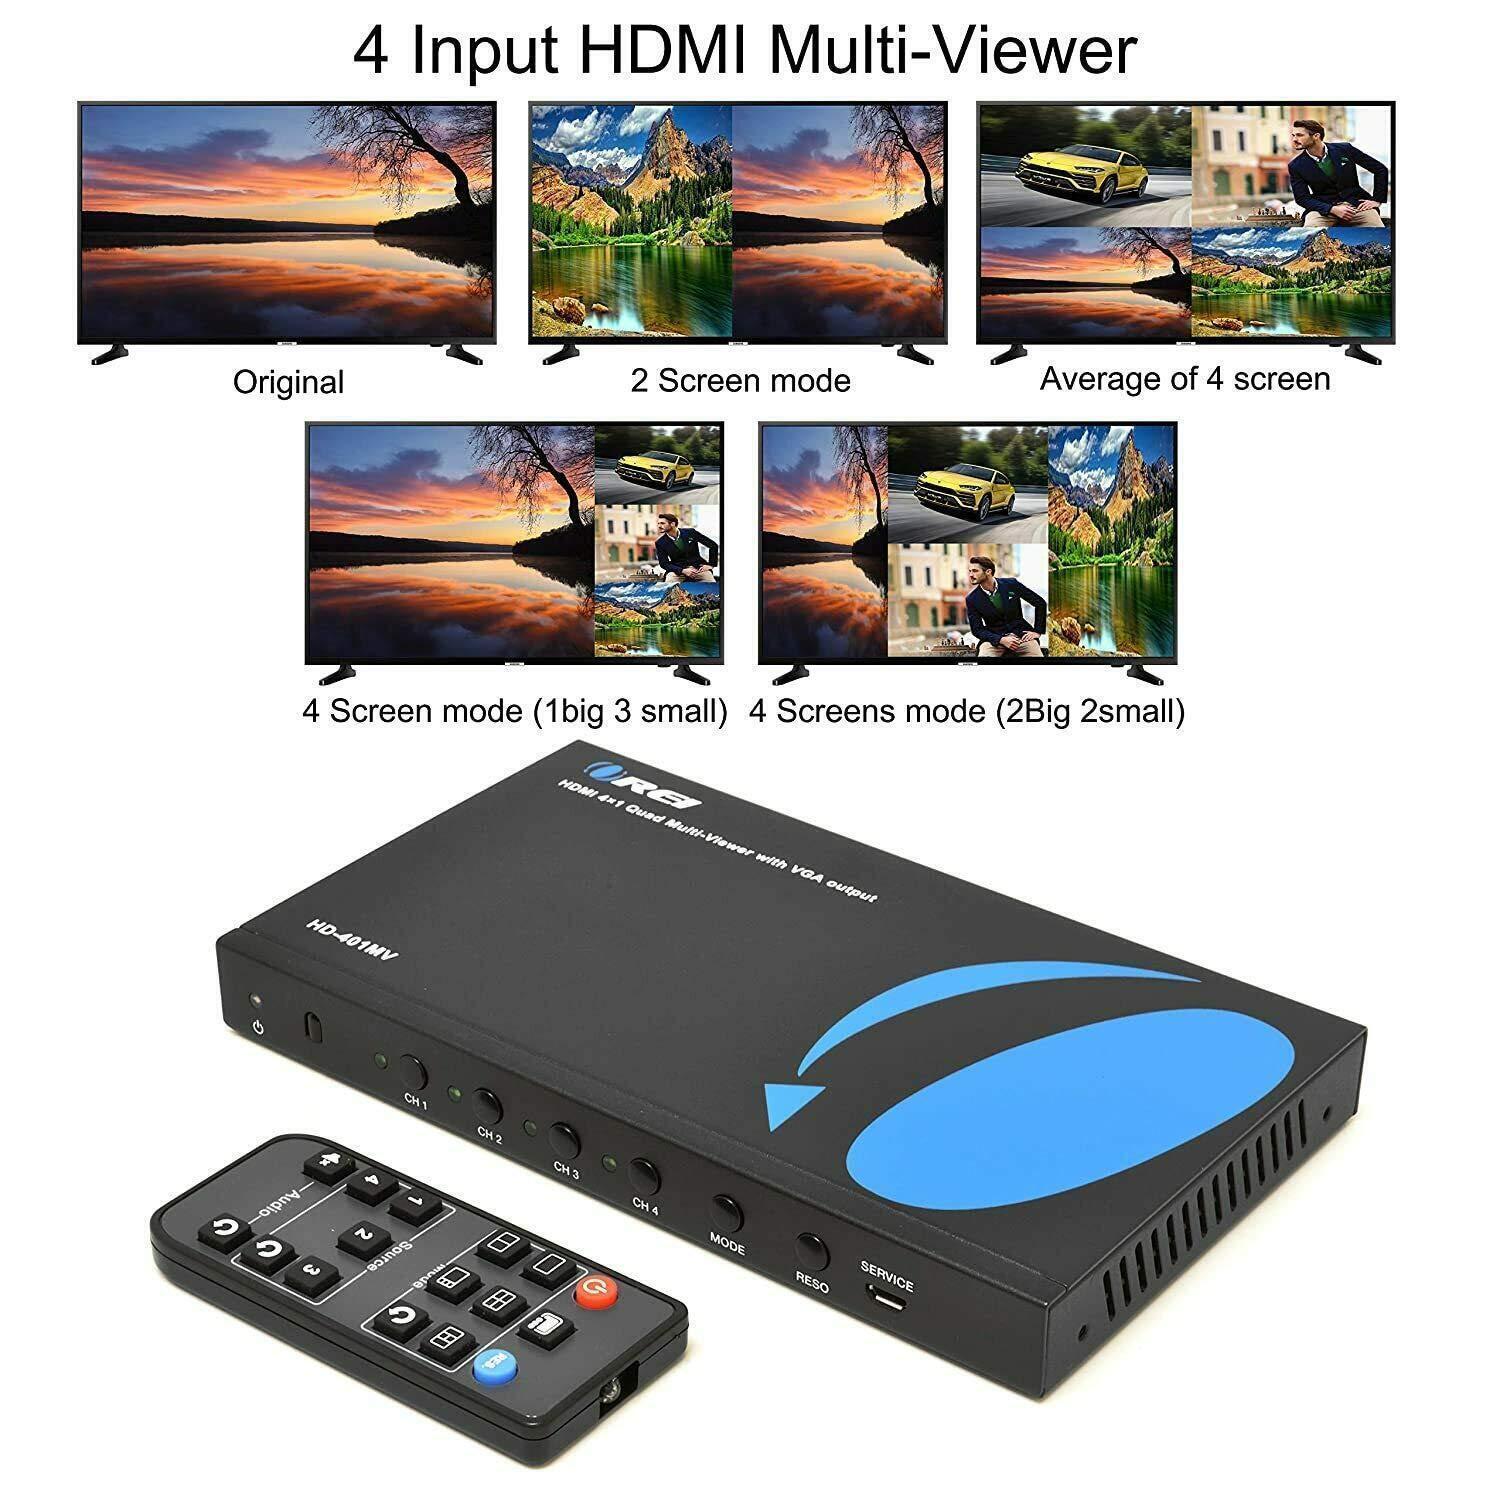 Quad Multi HDMI Viewer 4 in 1 Out HDMI Switcher 4 Ports Seamless Switcher alternate image